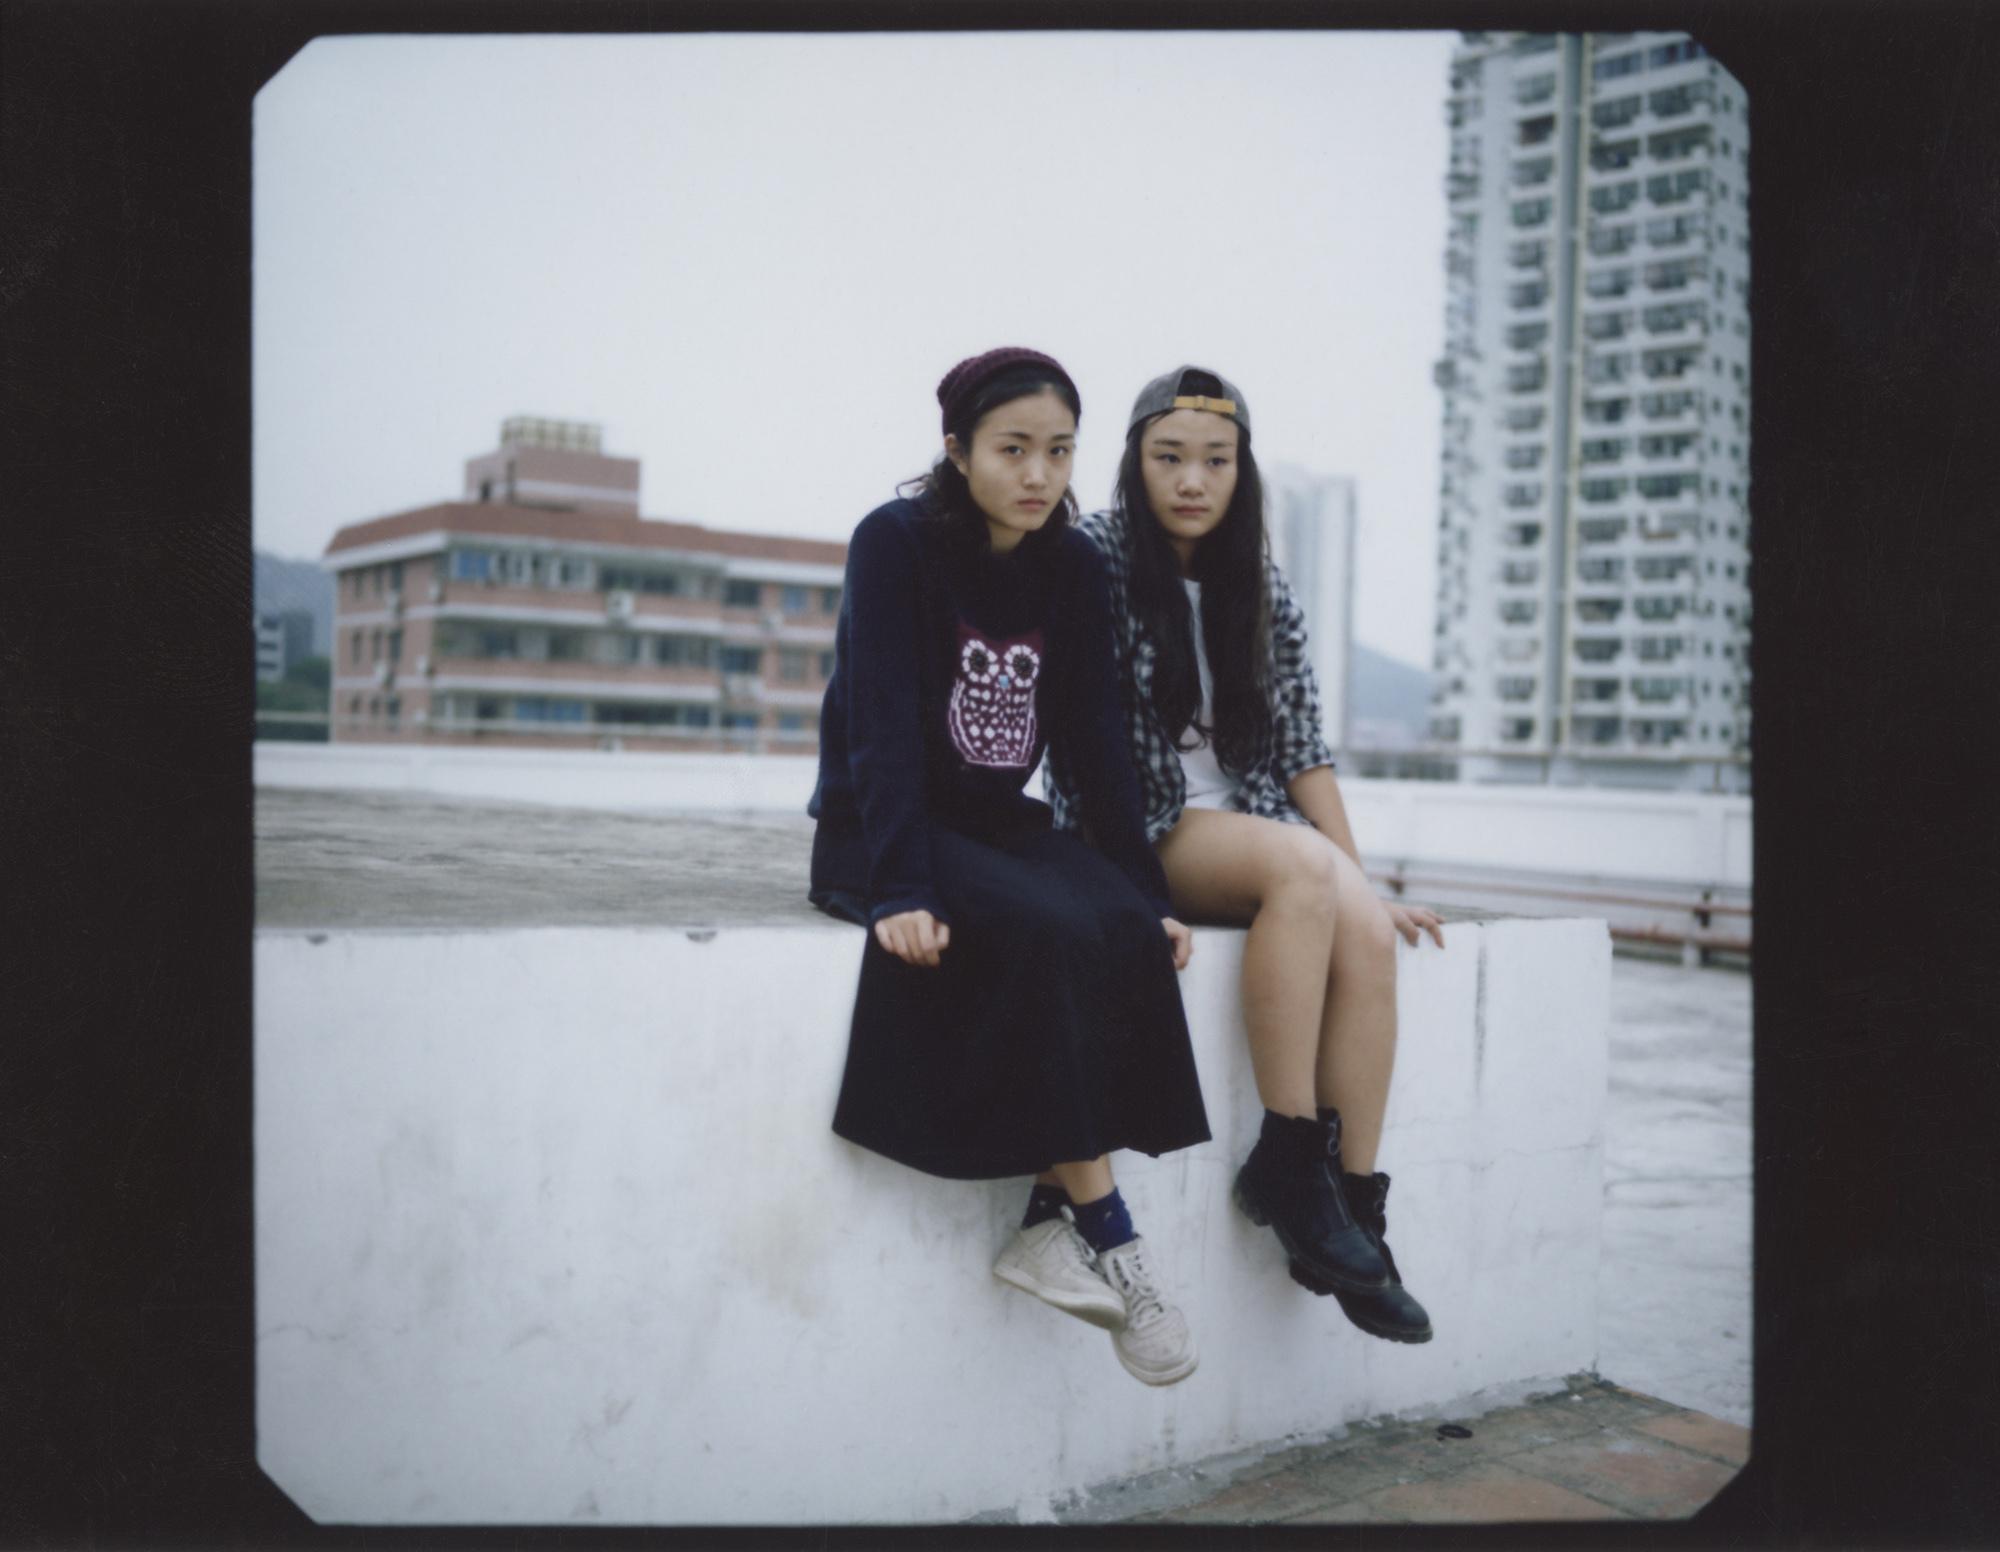 photographing the secret couples of china’s ‘garden island’ | read | i-D